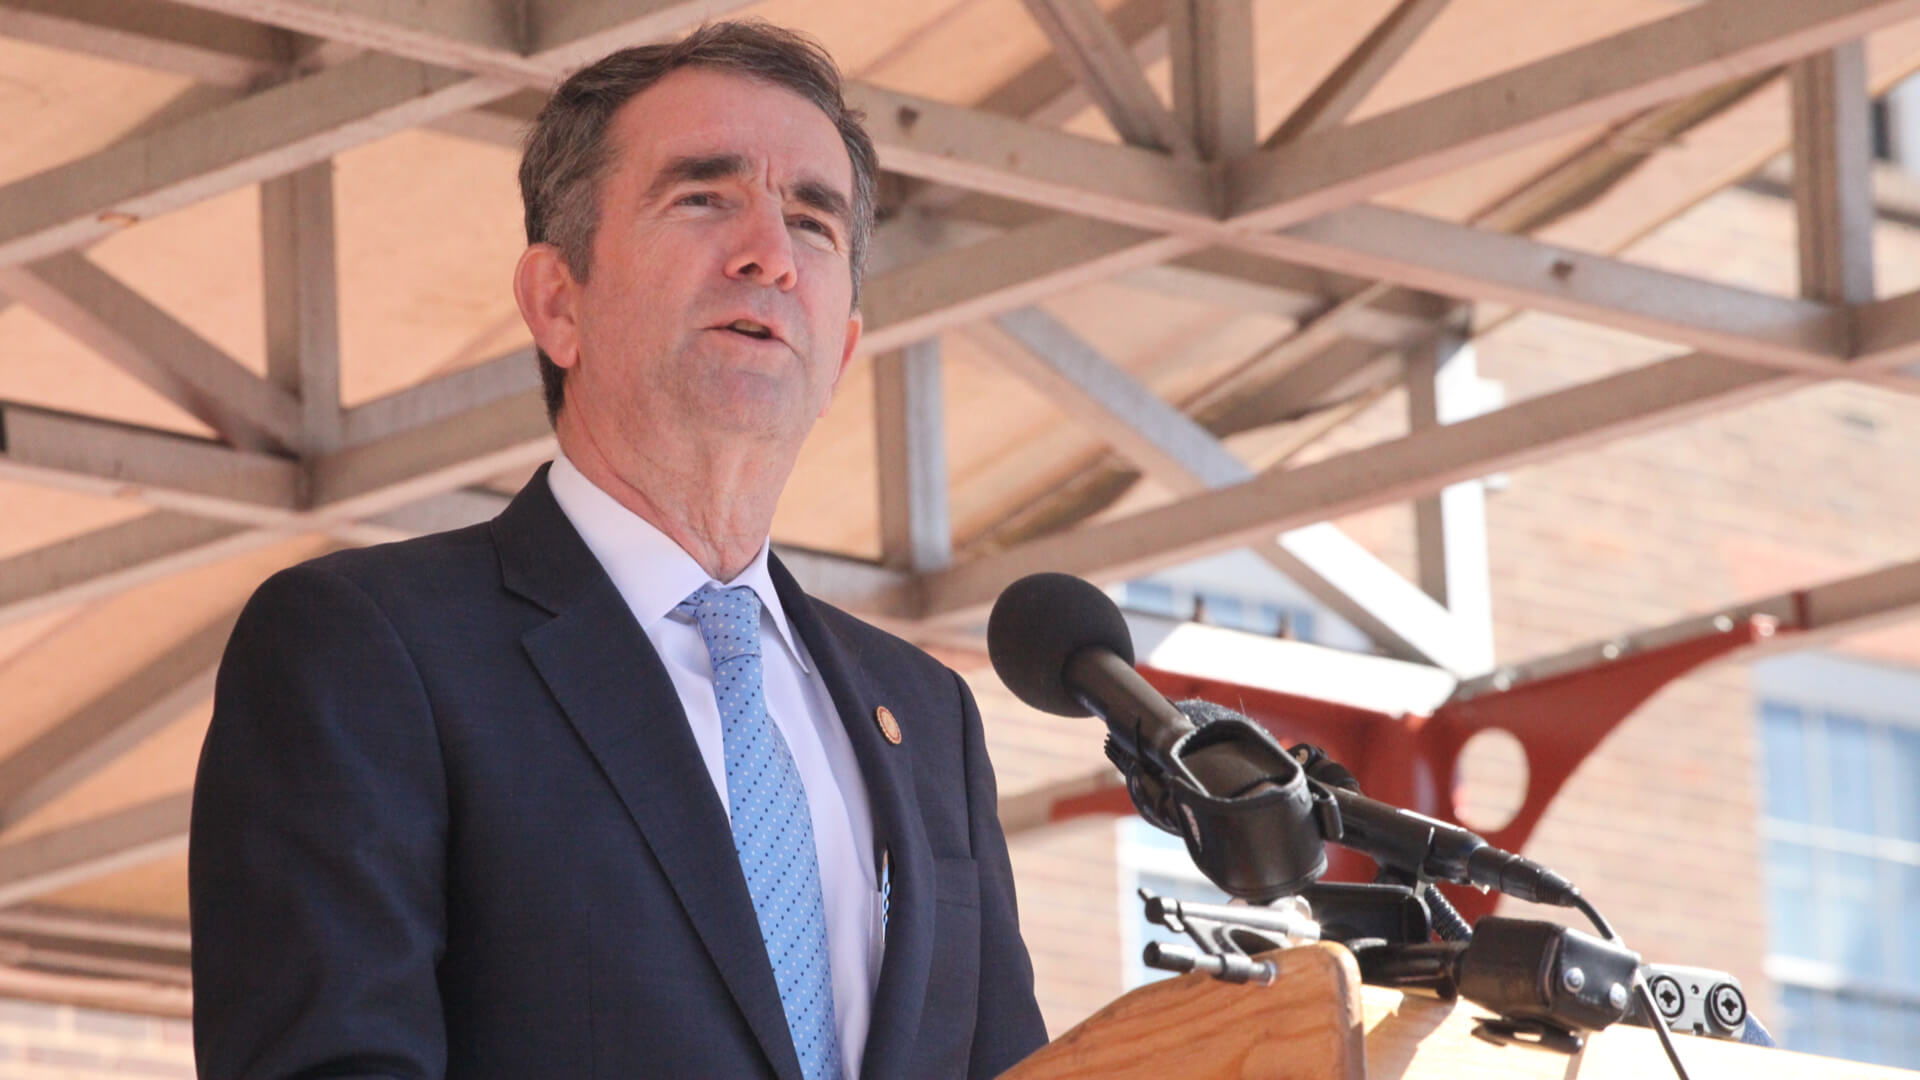 Virginia Governor, Ralph Northam speaking in front of Alexandria City Hall